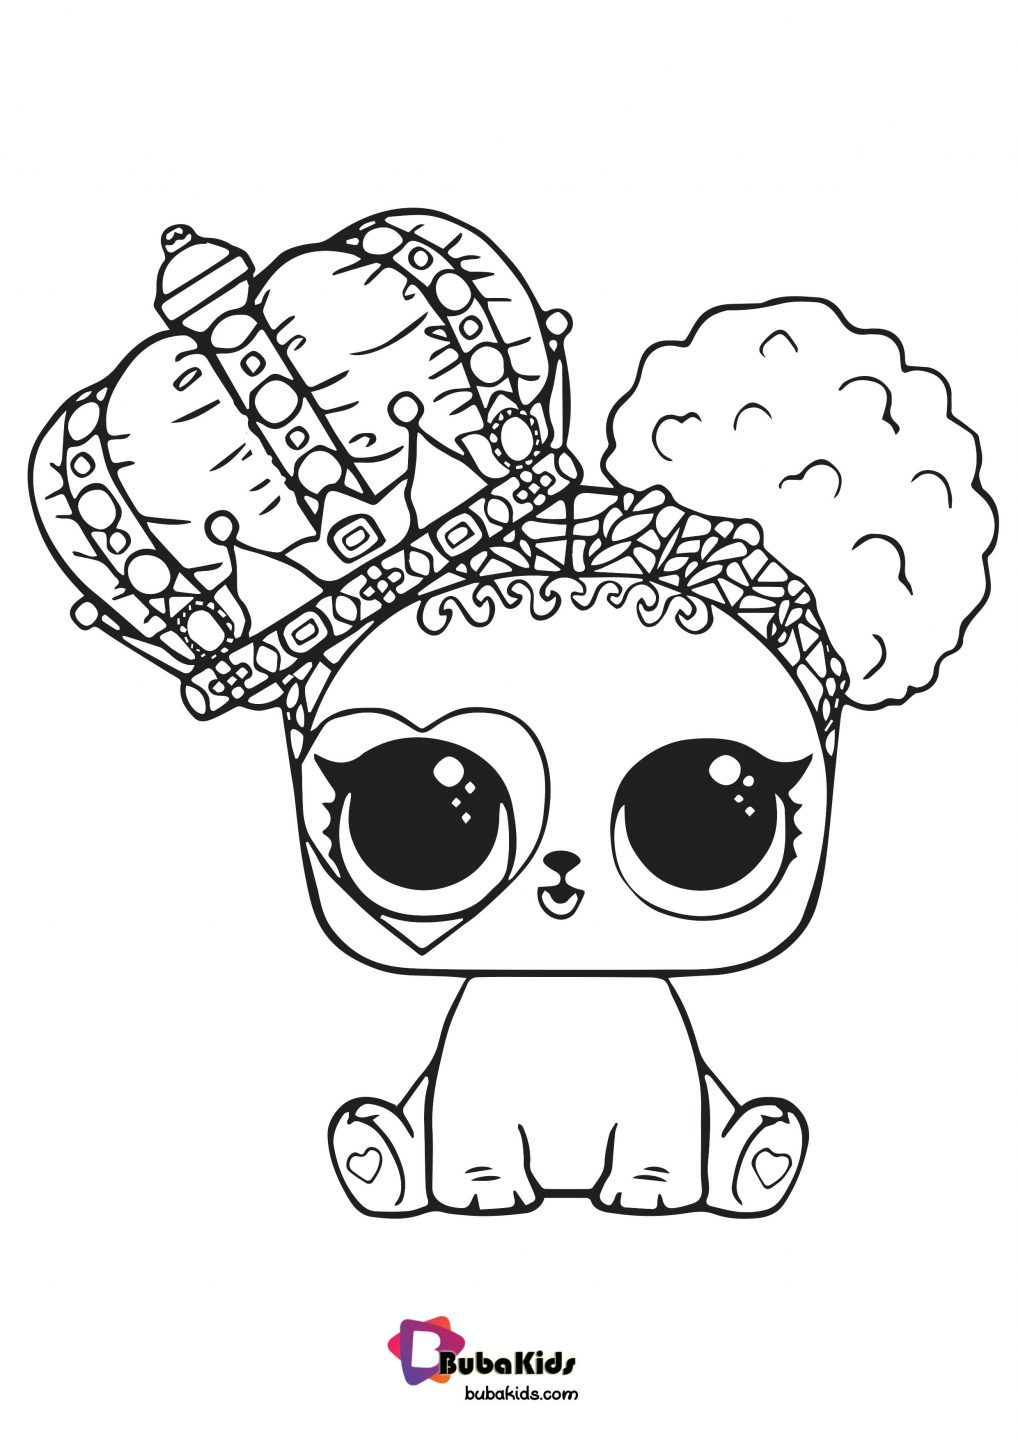 Cute LOL Pet Coloring Page For Girls in HD Resolution ...